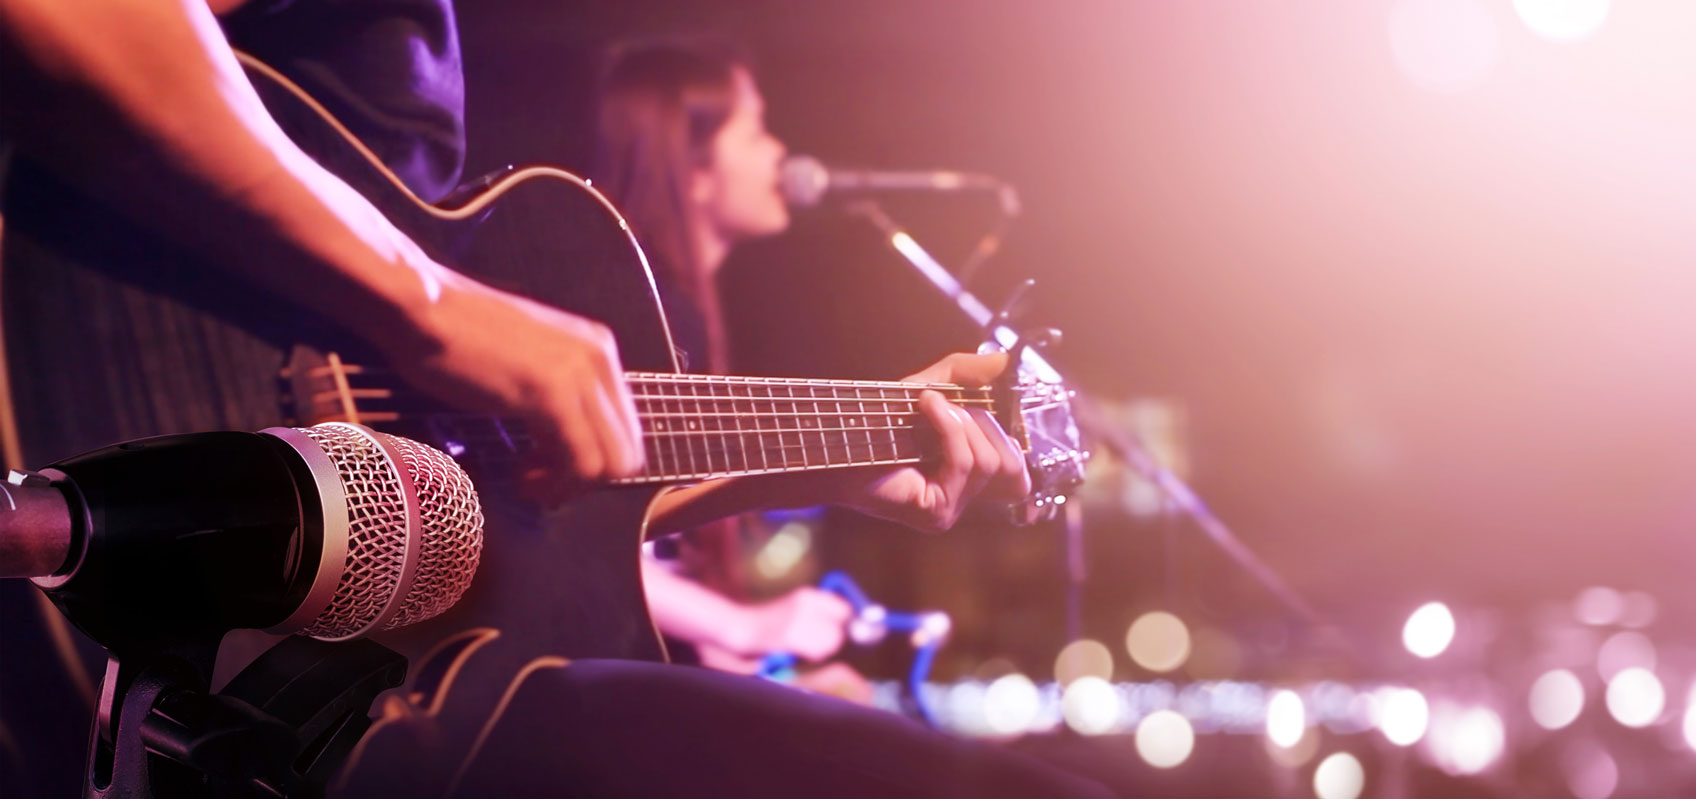 close up view of man playing guitar with woman singing into microphone in the background